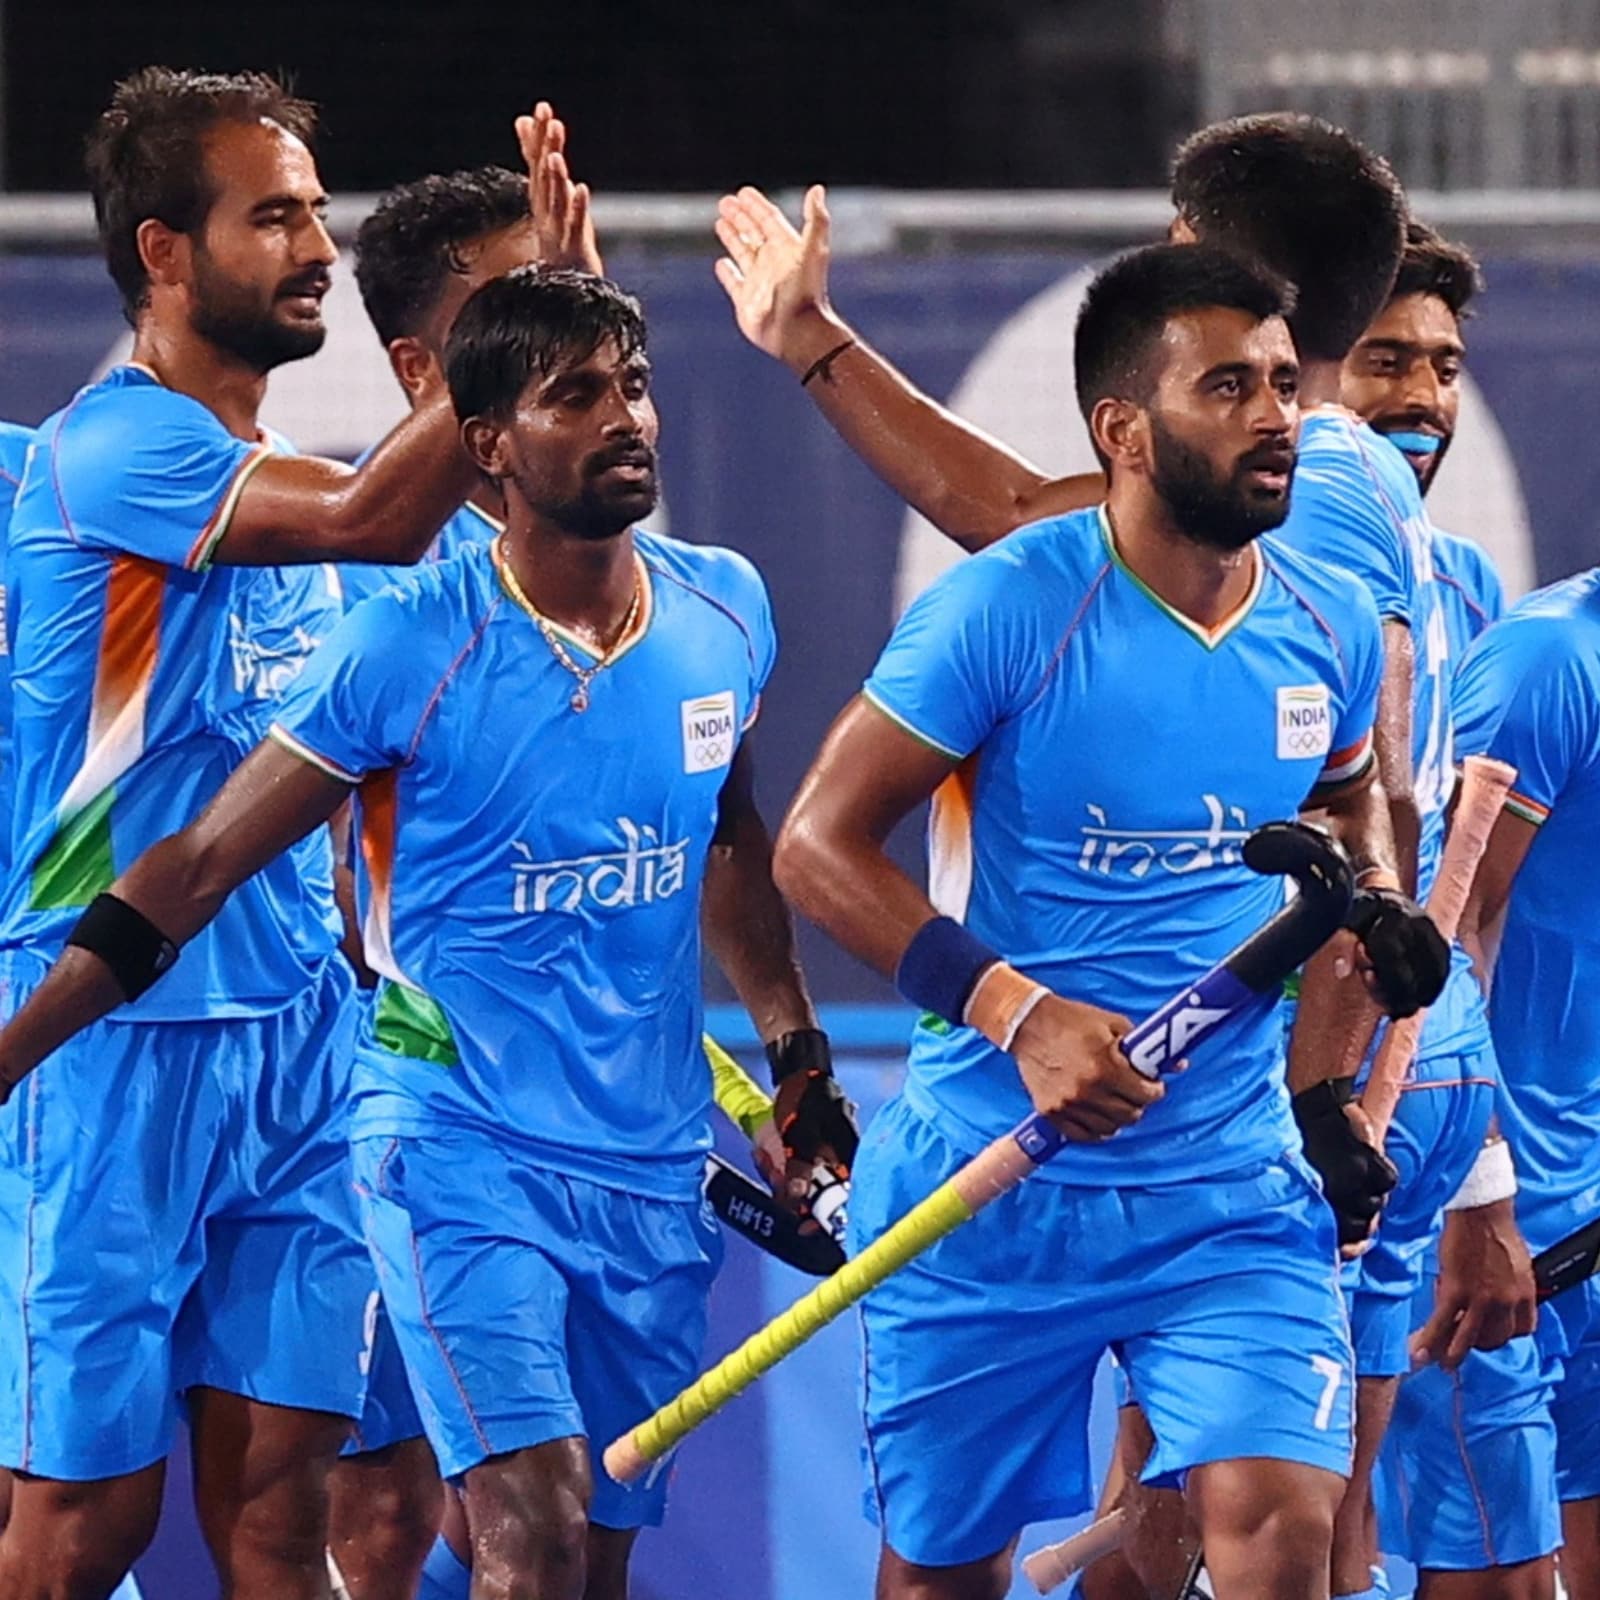 Tokyo Olympics: Indian hockey's success after 41 years and name